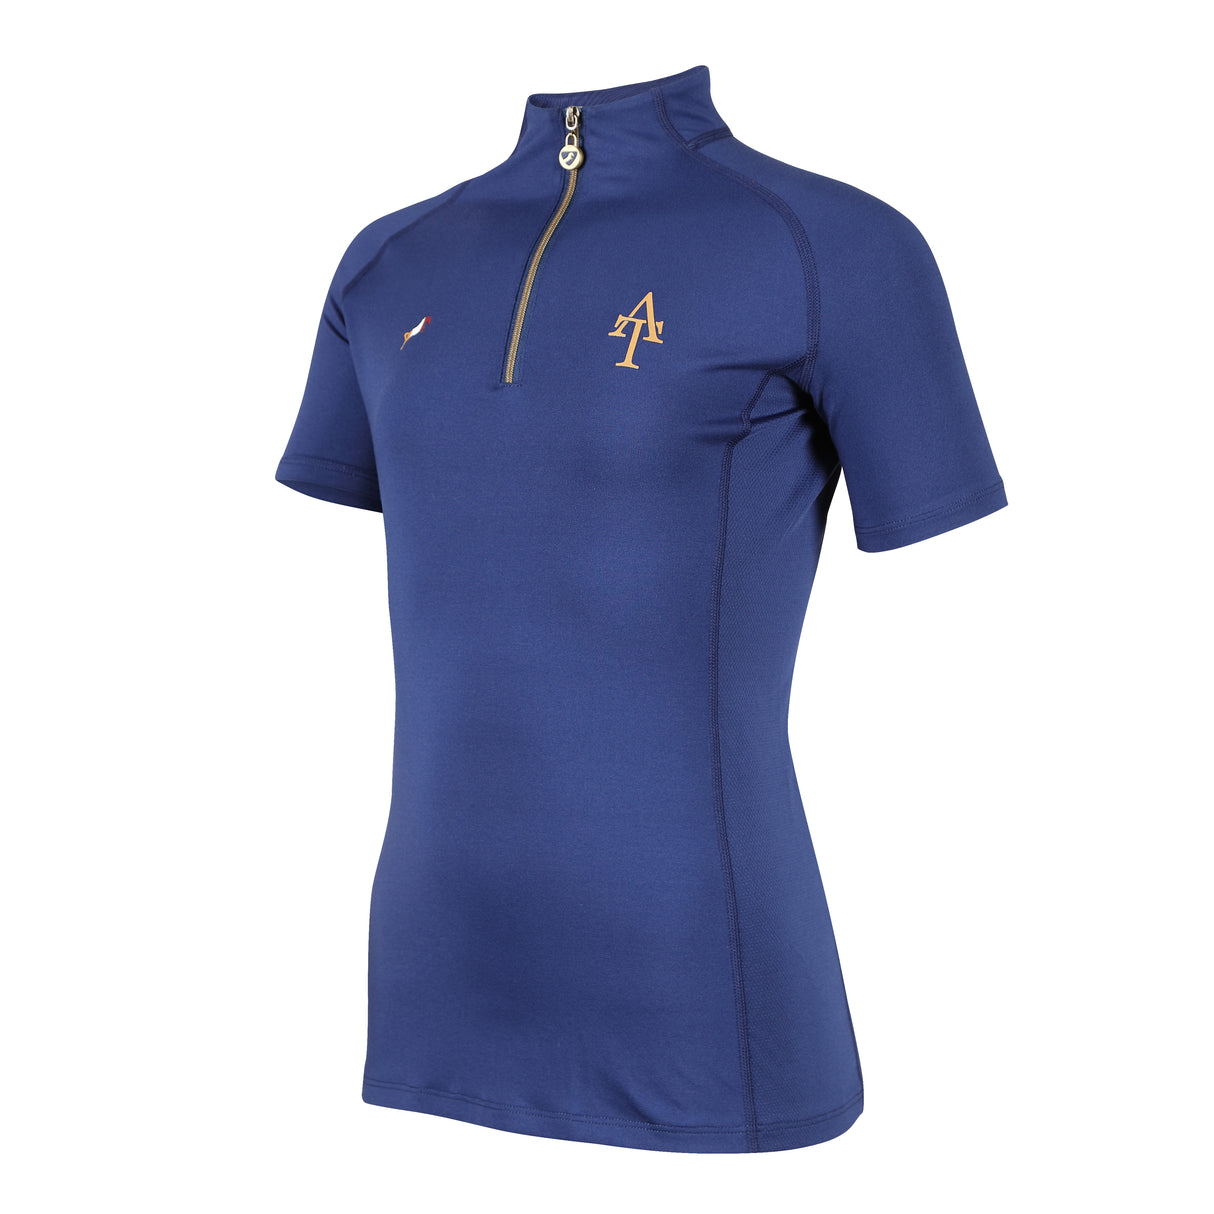 Shires Aubrion Team Young Rider Short Sleeve Base Layer #colour_navy